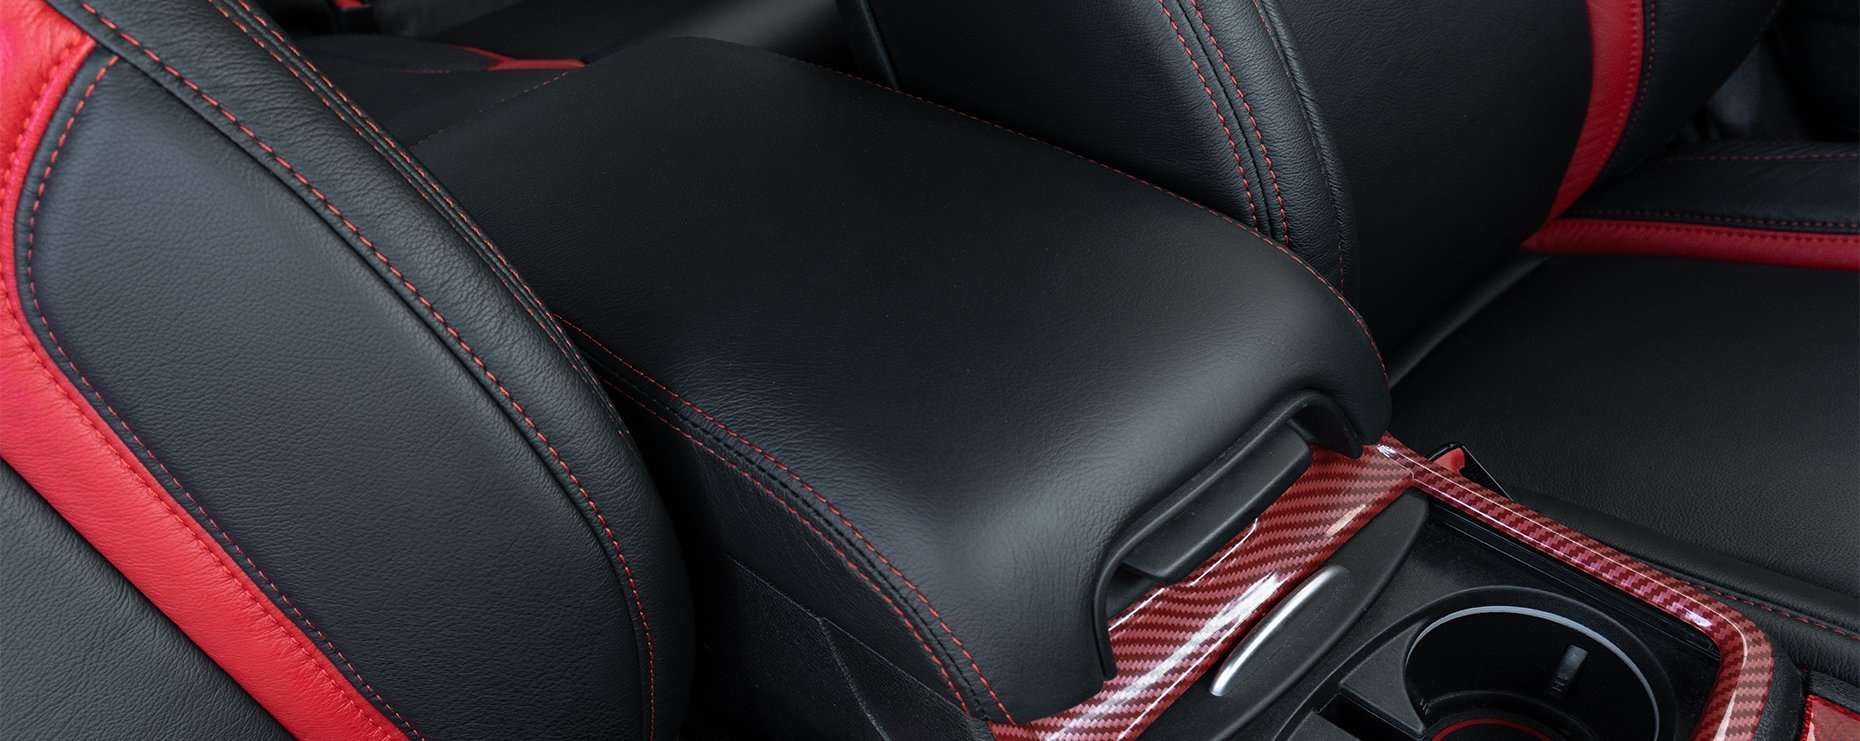 Dodge Charger Gallery Project Console Package Image